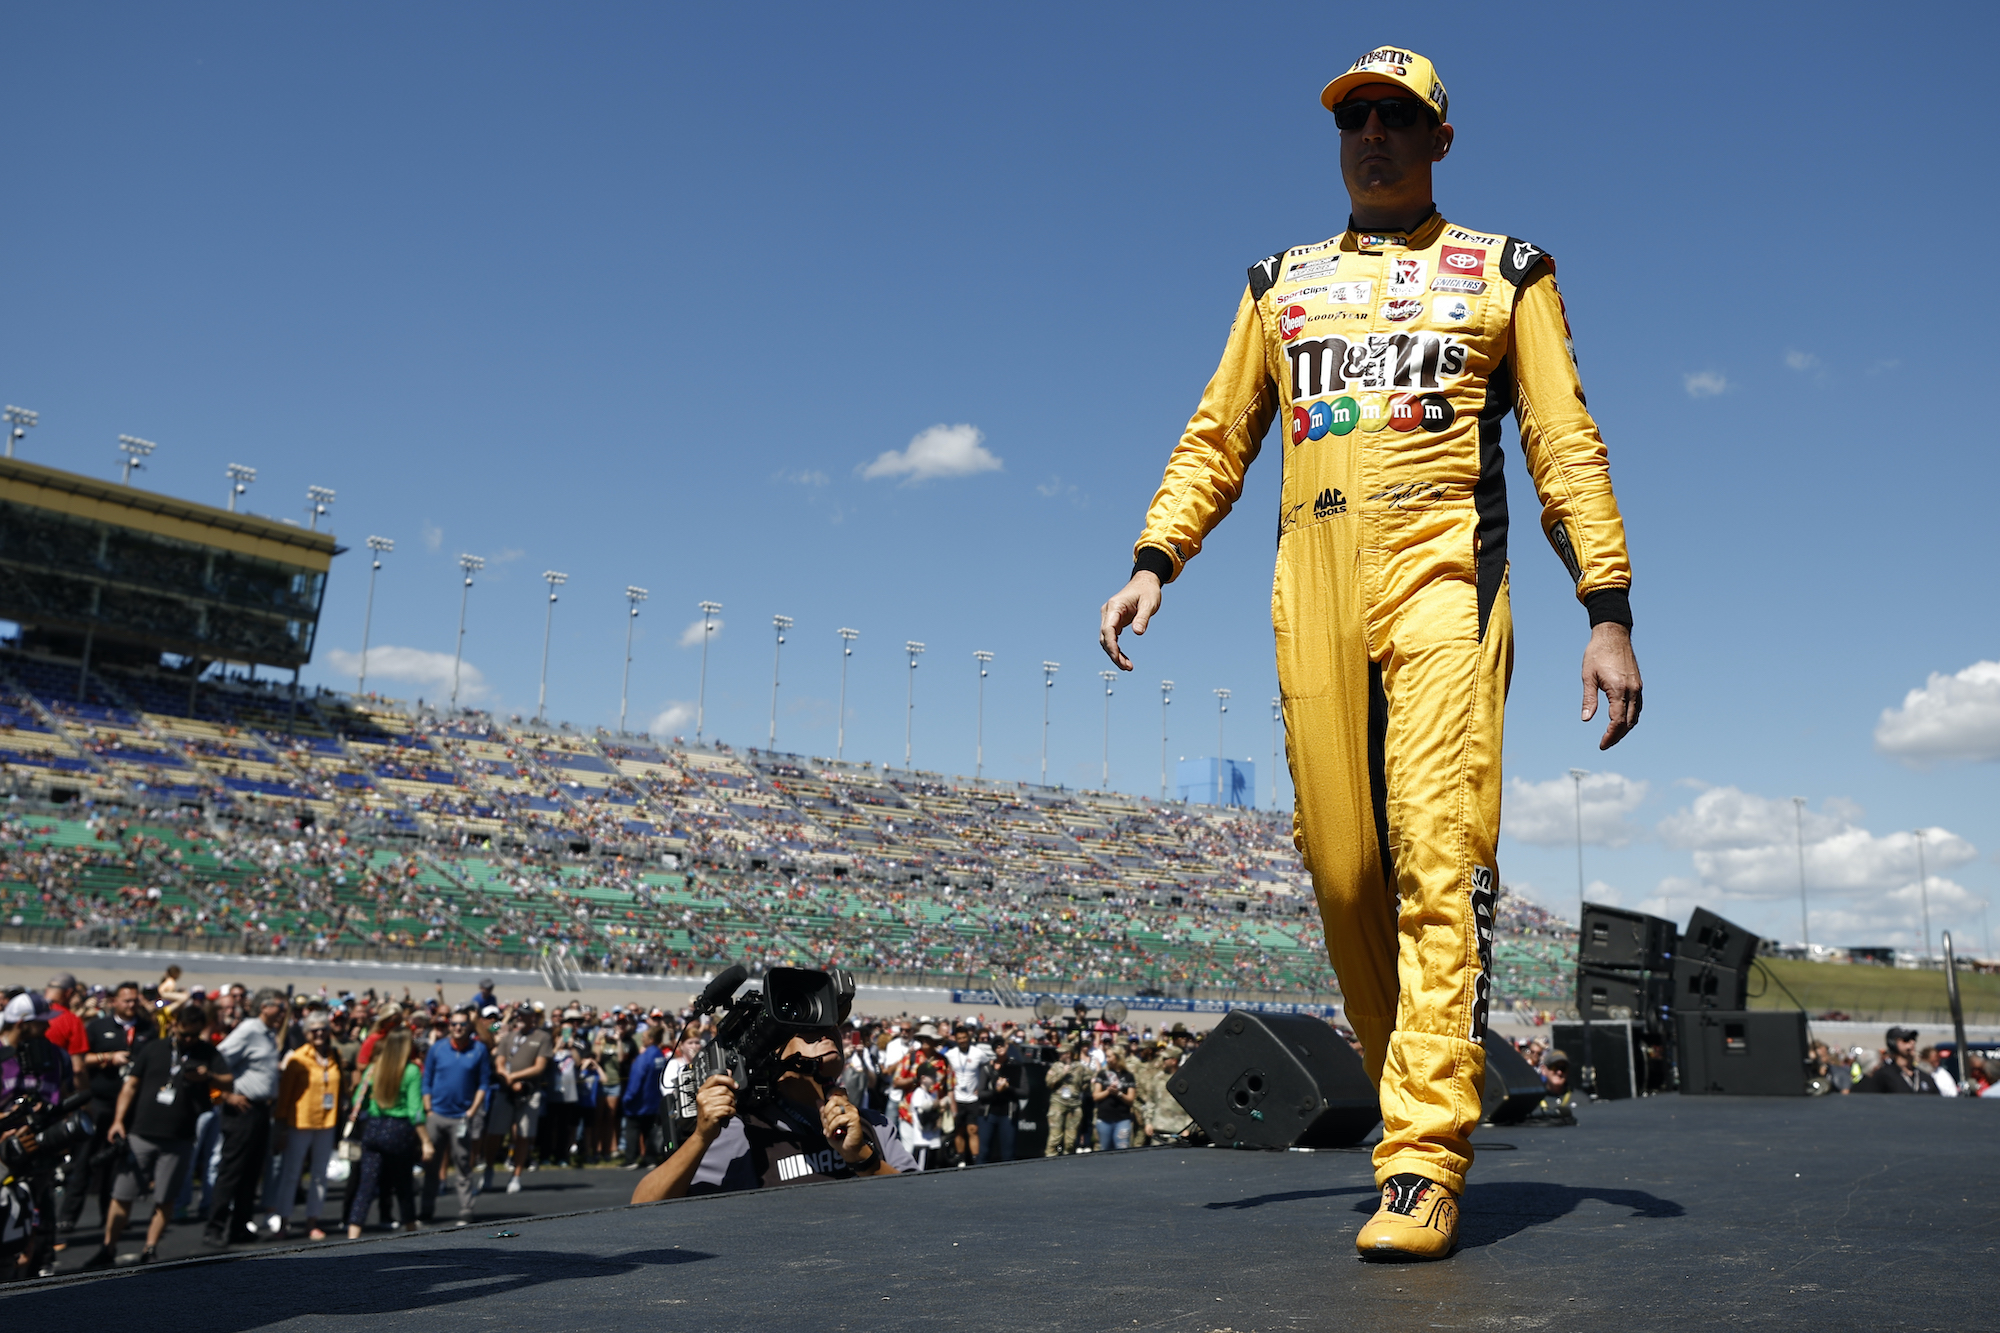 Kyle Busch Makes Eye-Opening Statement After Kansas About Feeling Alone, and Hints of a Strained Relationship at Joe Gibbs Racing